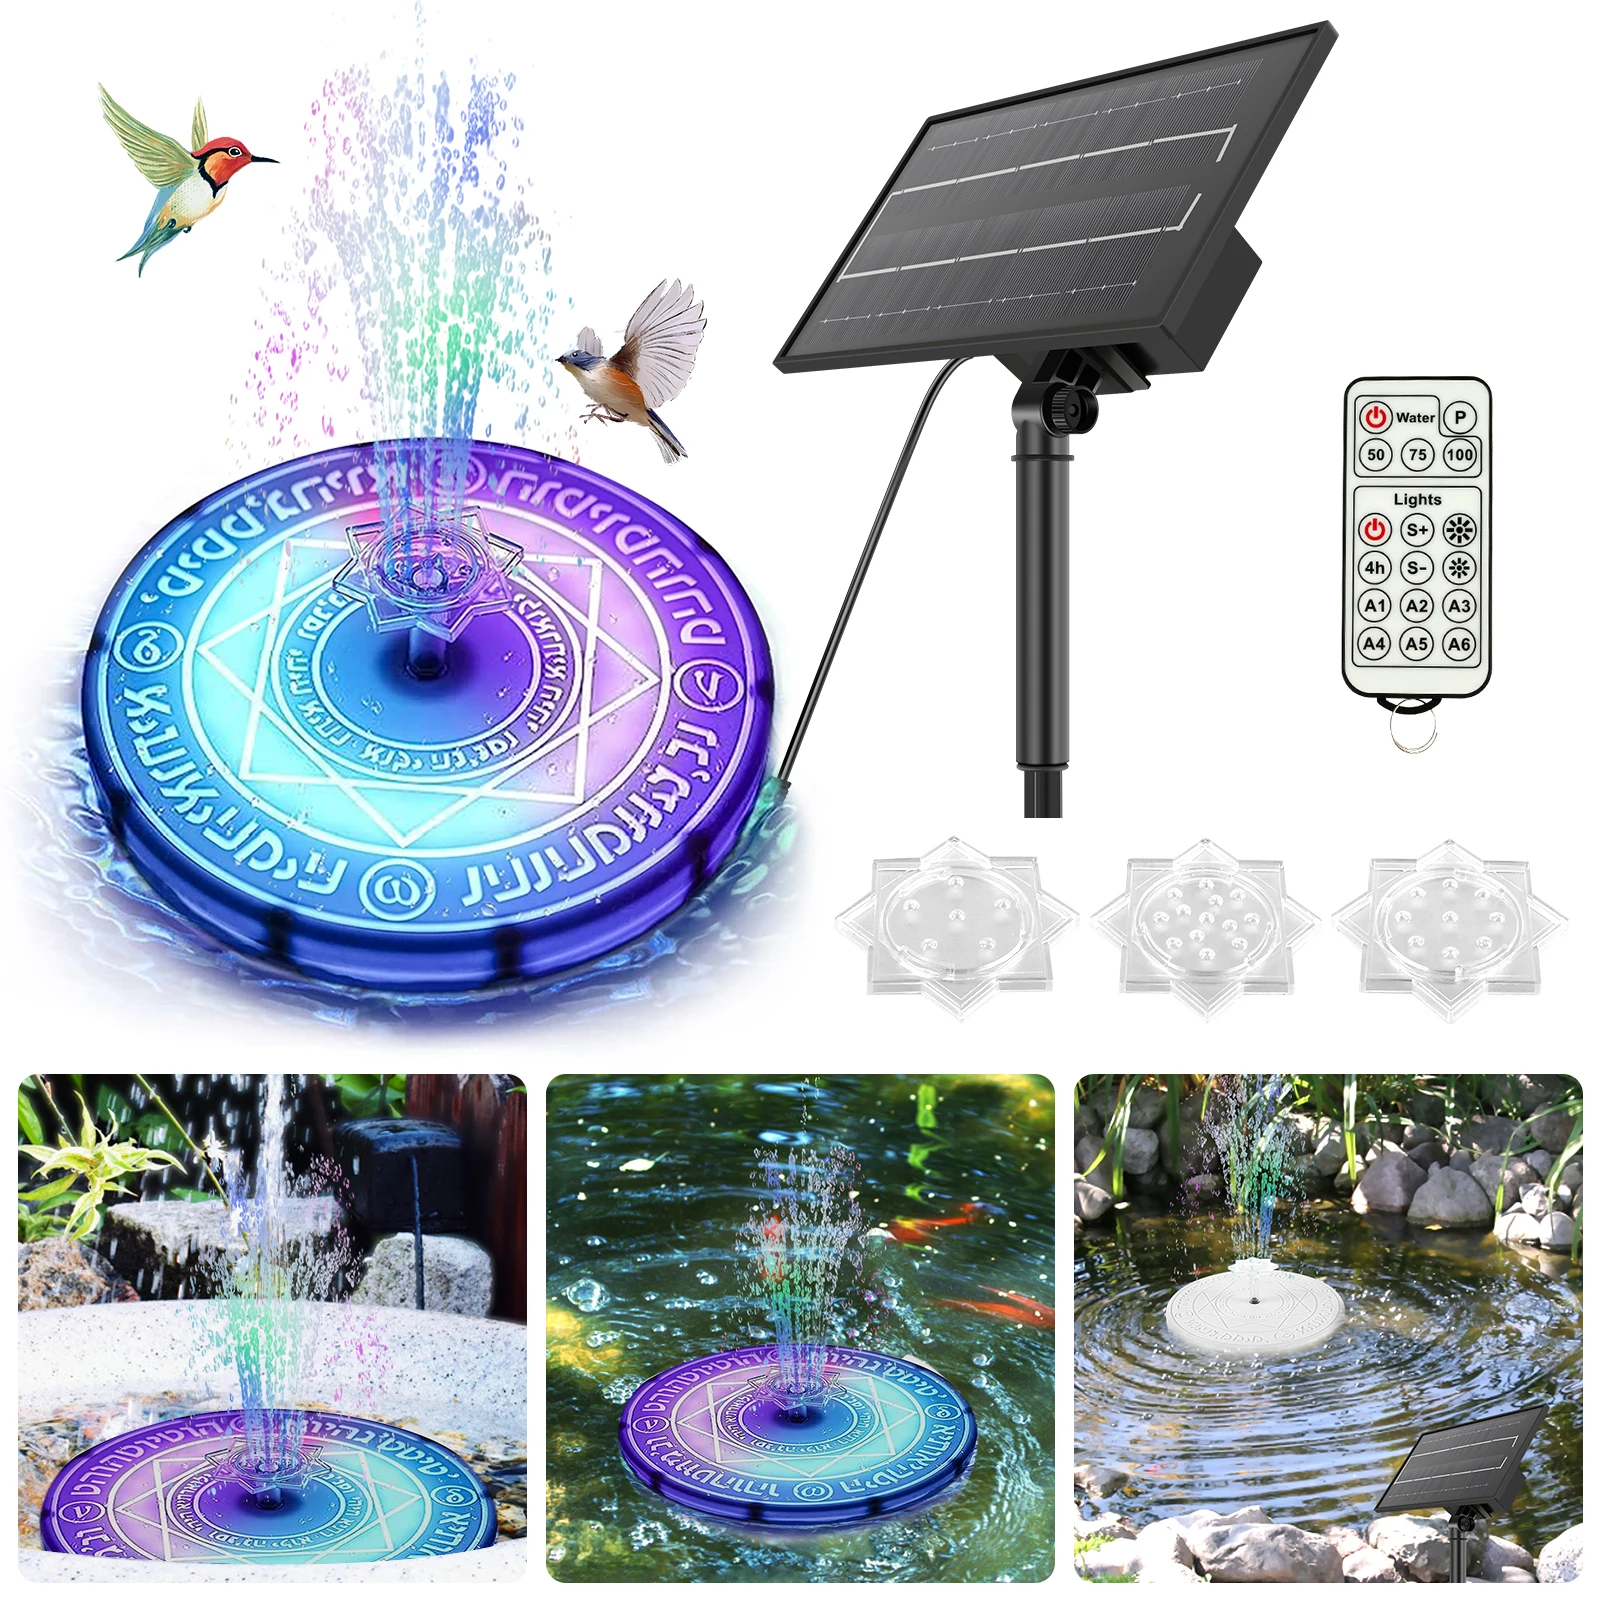 72LED Solar Fountain Pump 2.5W Remote Control Solar Water Pump Light IP66 Waterproof Solar Fountain Lamp with 3 Nozzles RGB